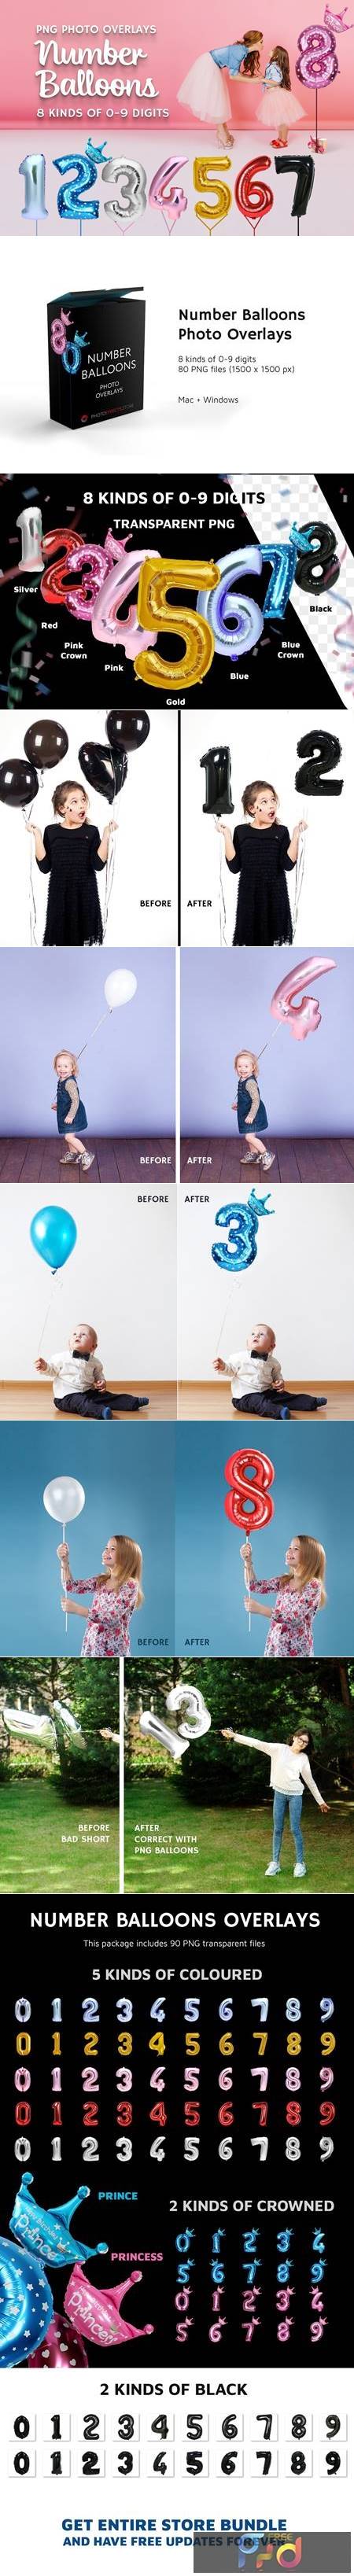 80 Number Balloons Photo Overlays 5224487 1